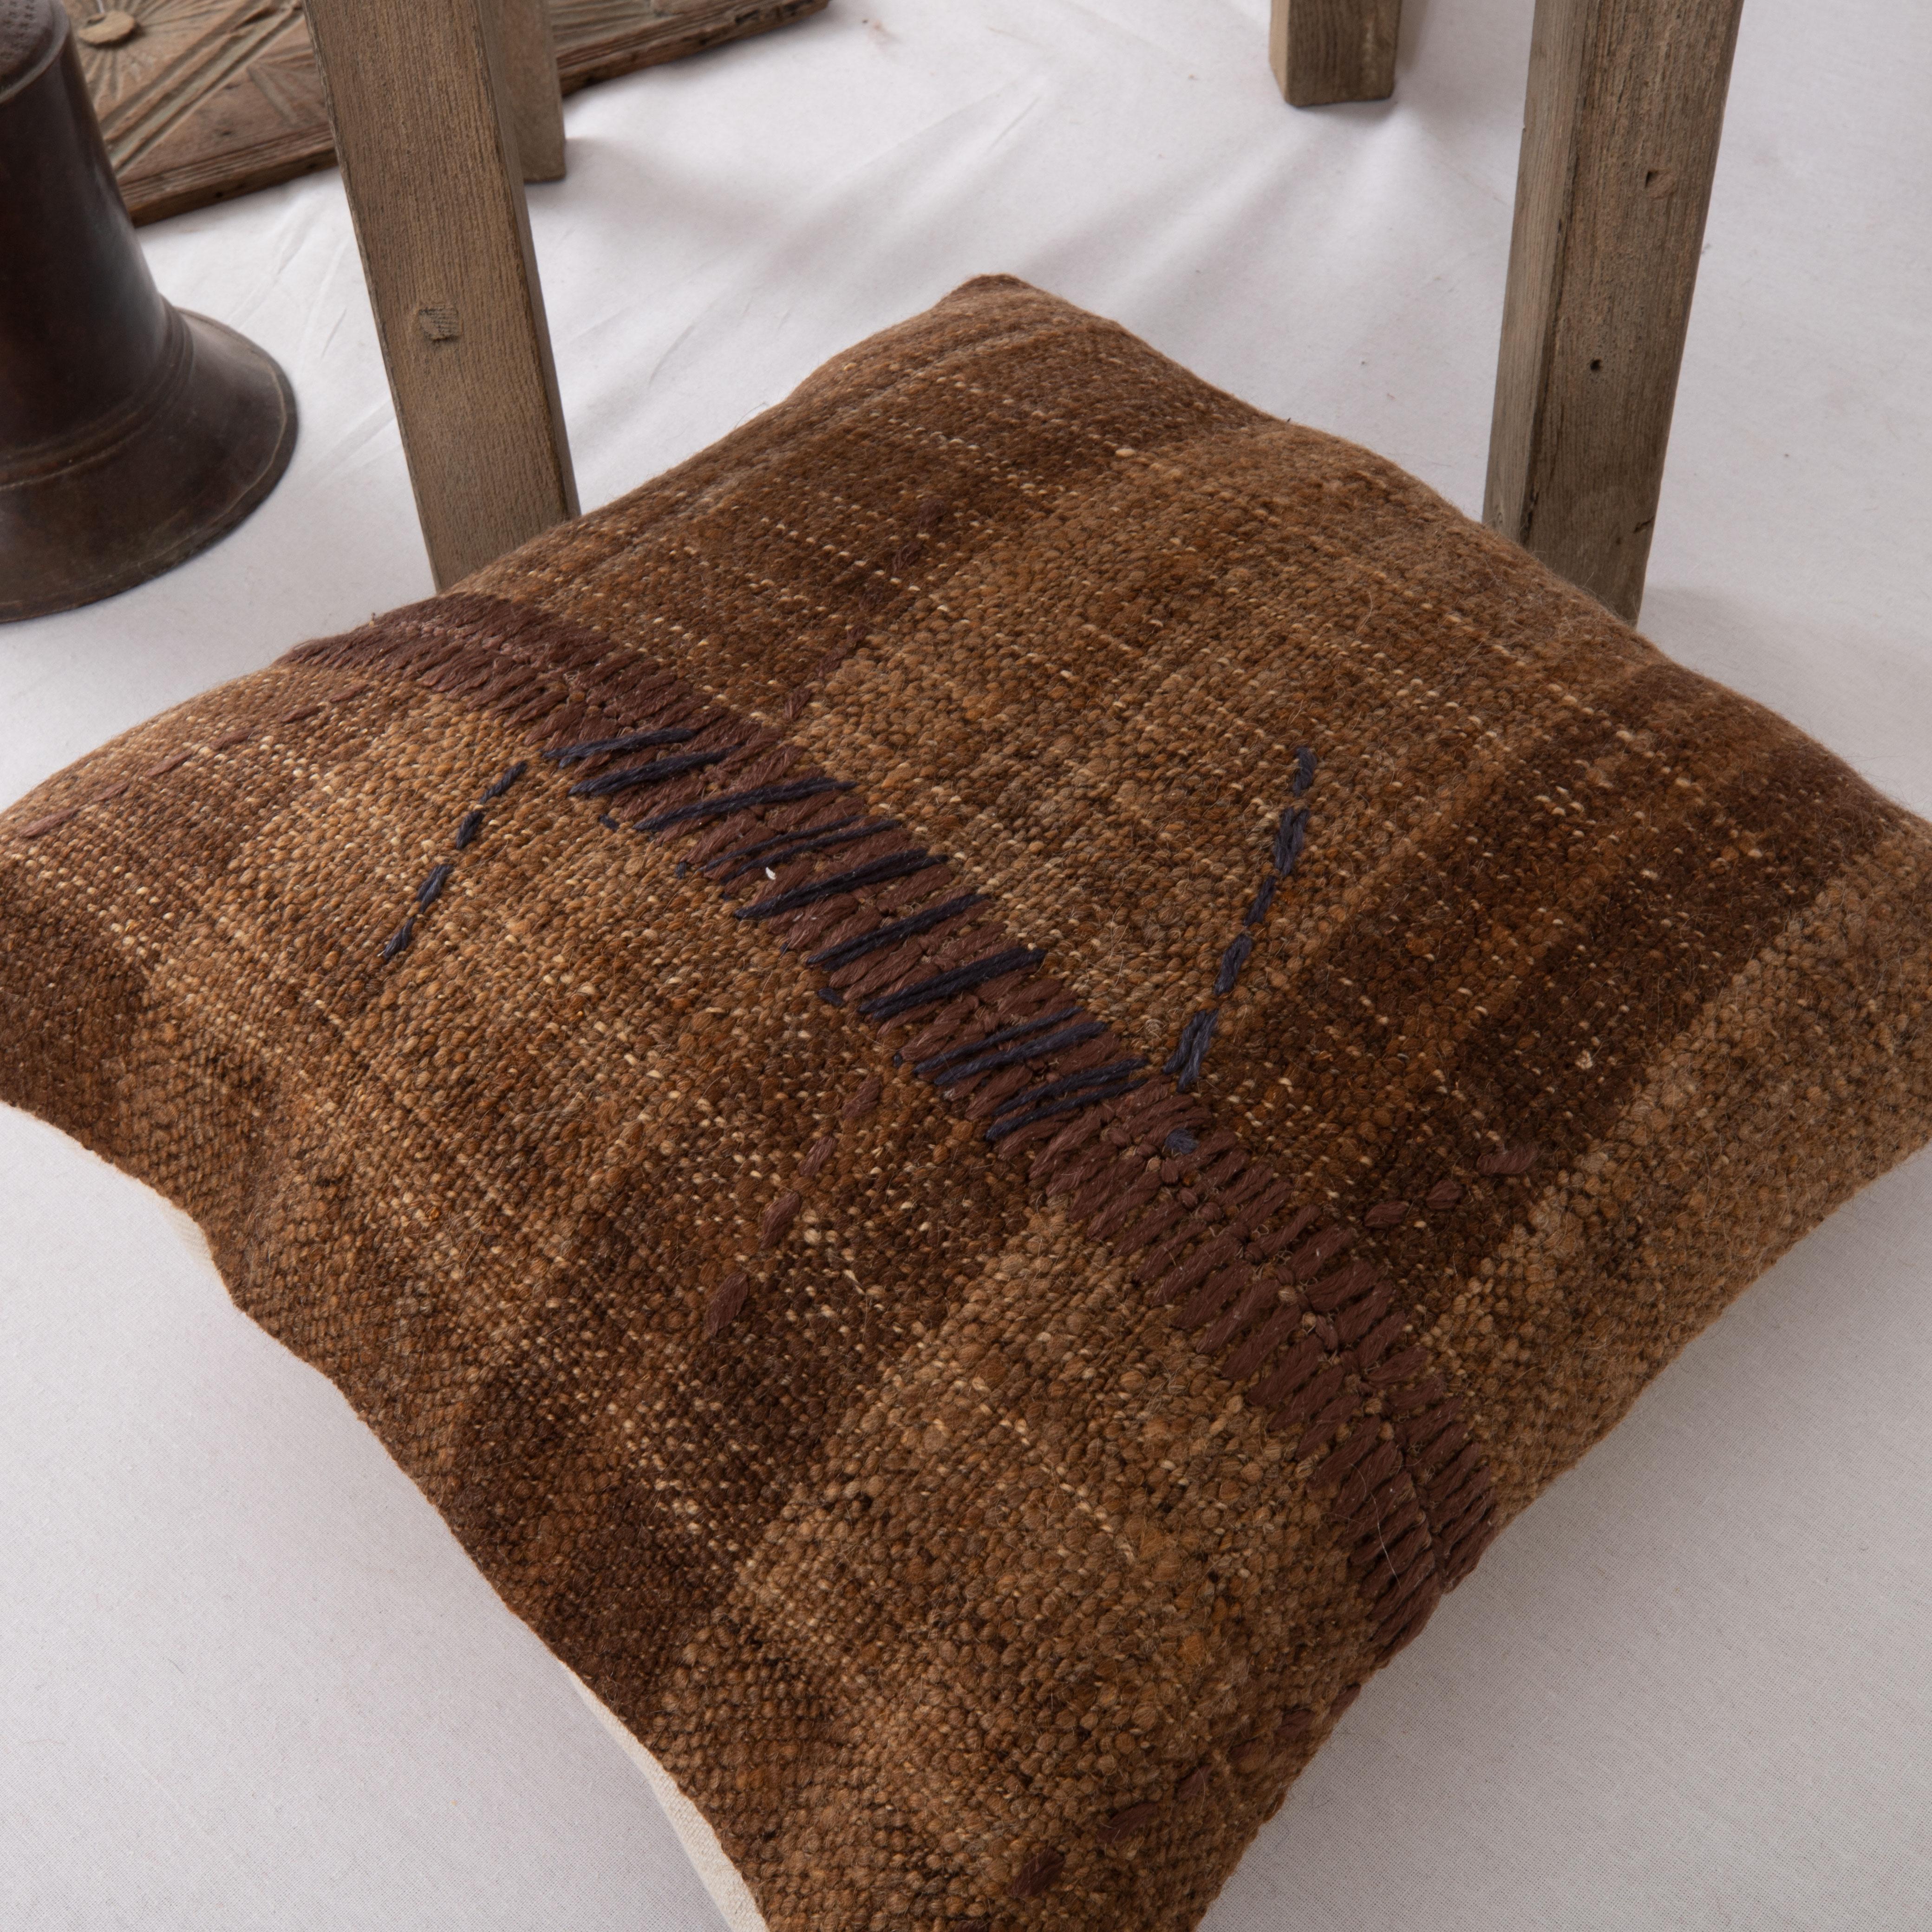 Rustic Pillow Case Made from a Vintage Un-Dyed Wool Coverlet, Mid 20th C In Good Condition For Sale In Istanbul, TR